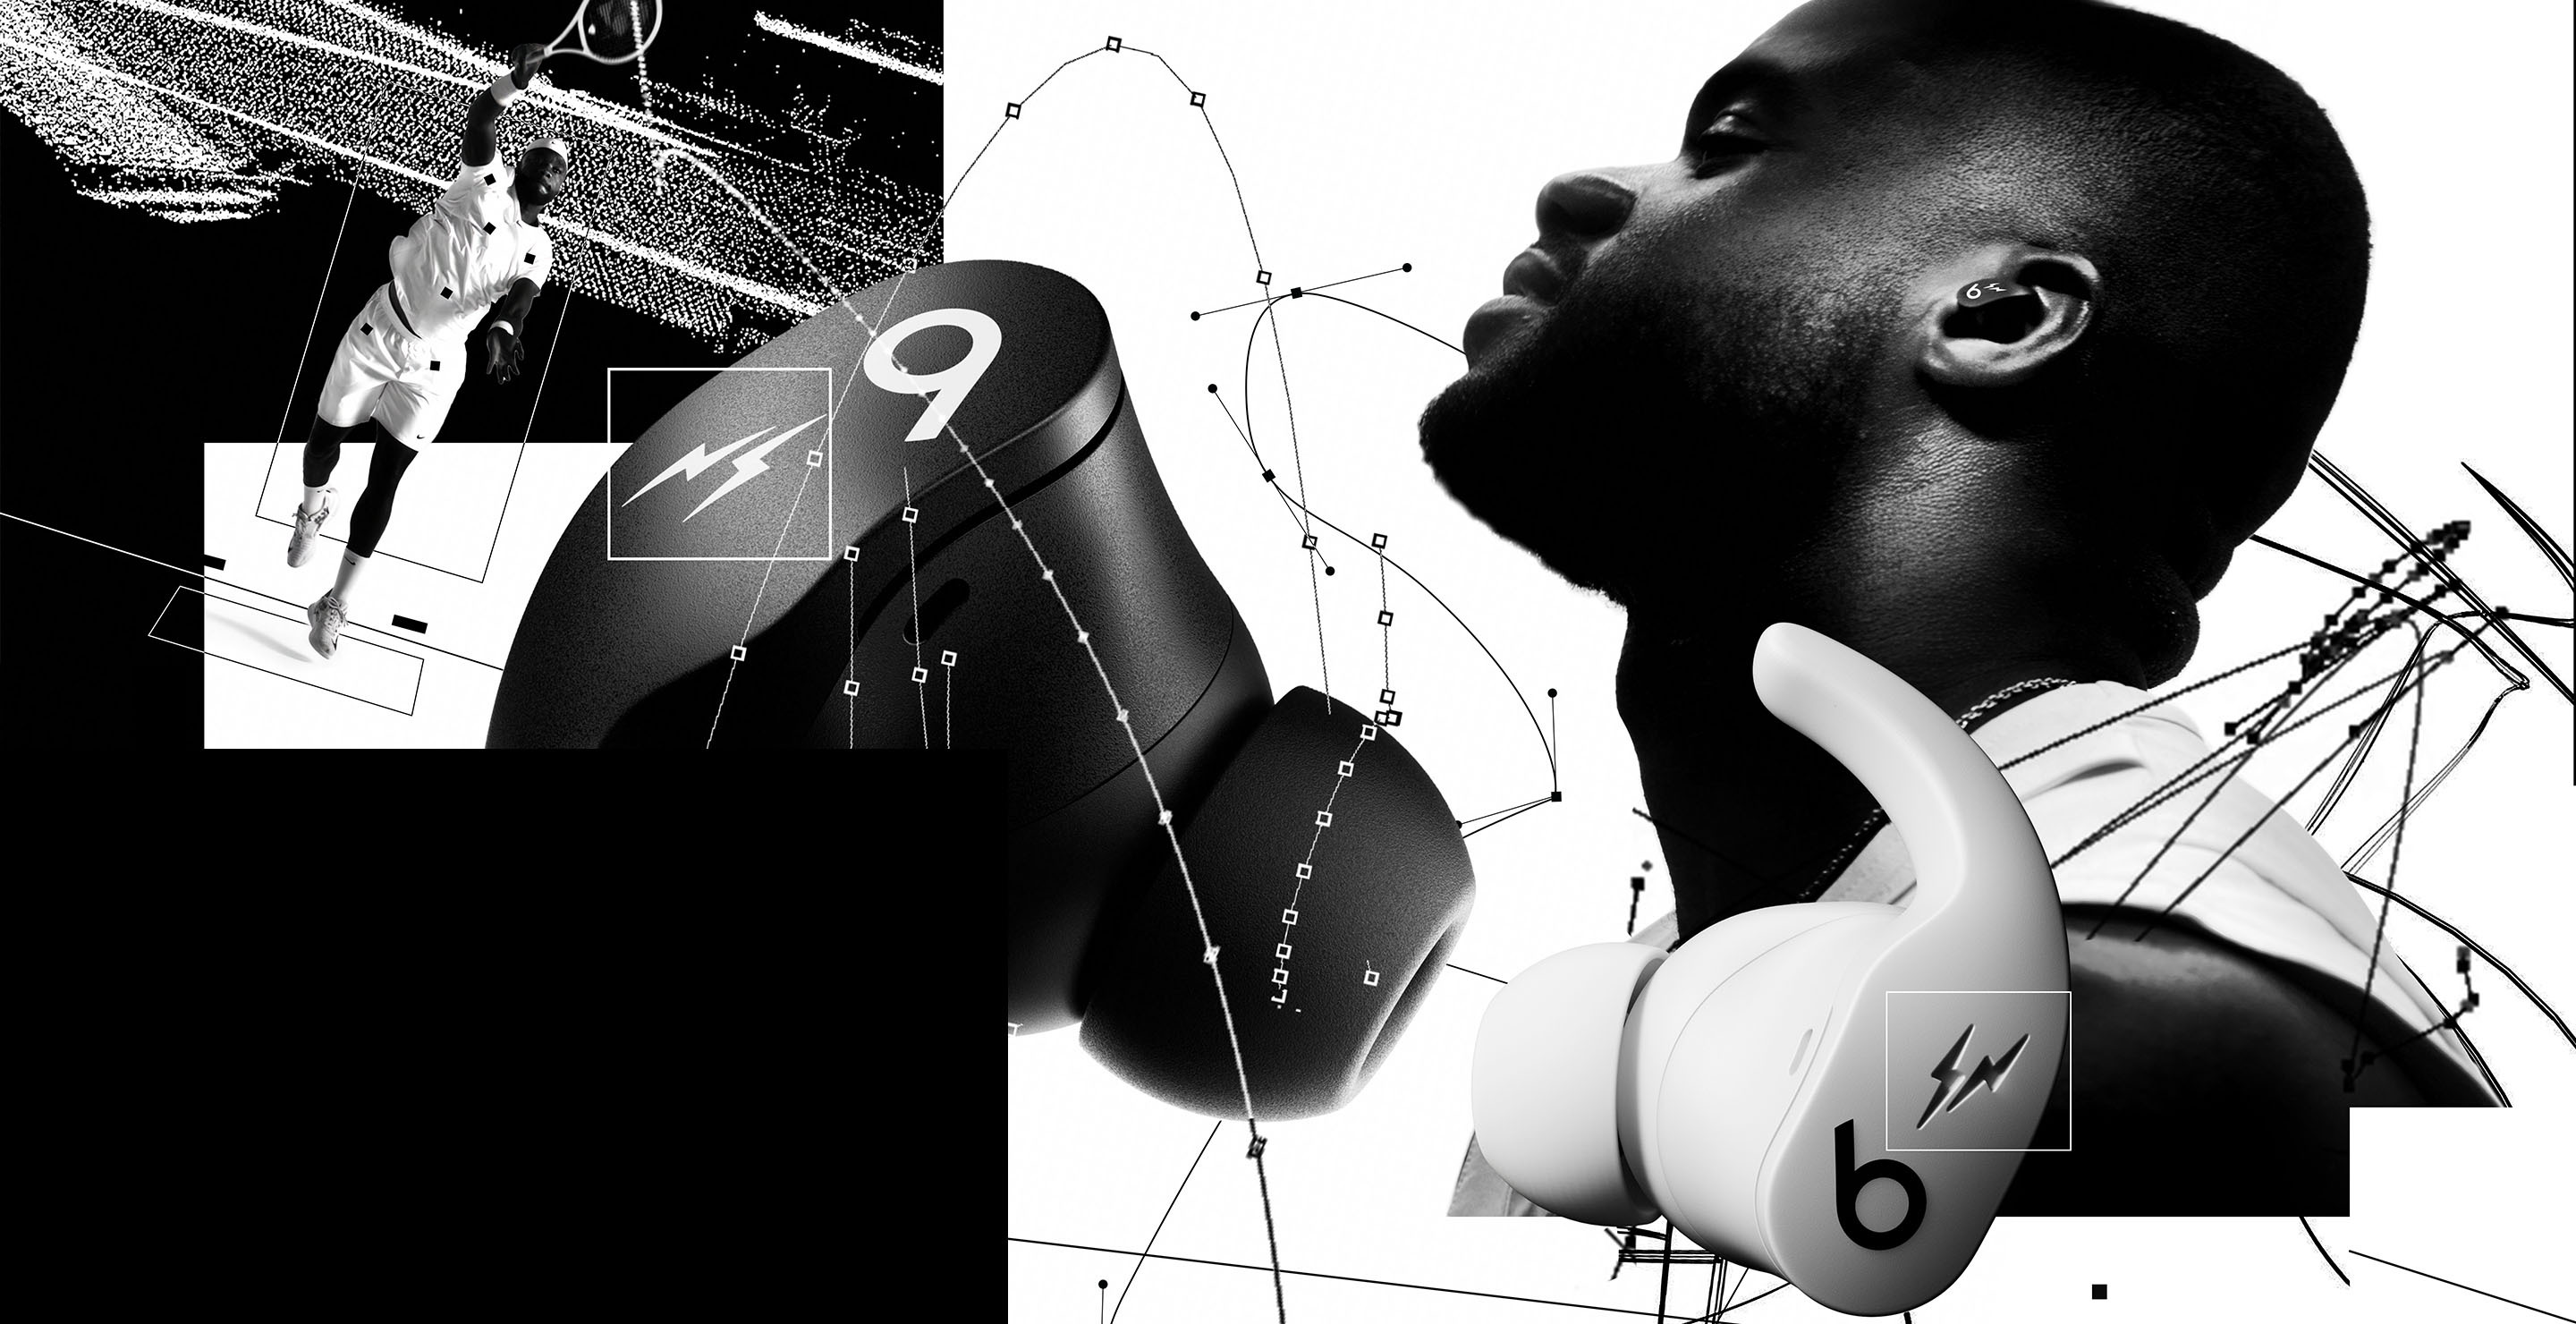 Fragment Beats Fit Pro with black and white graphics